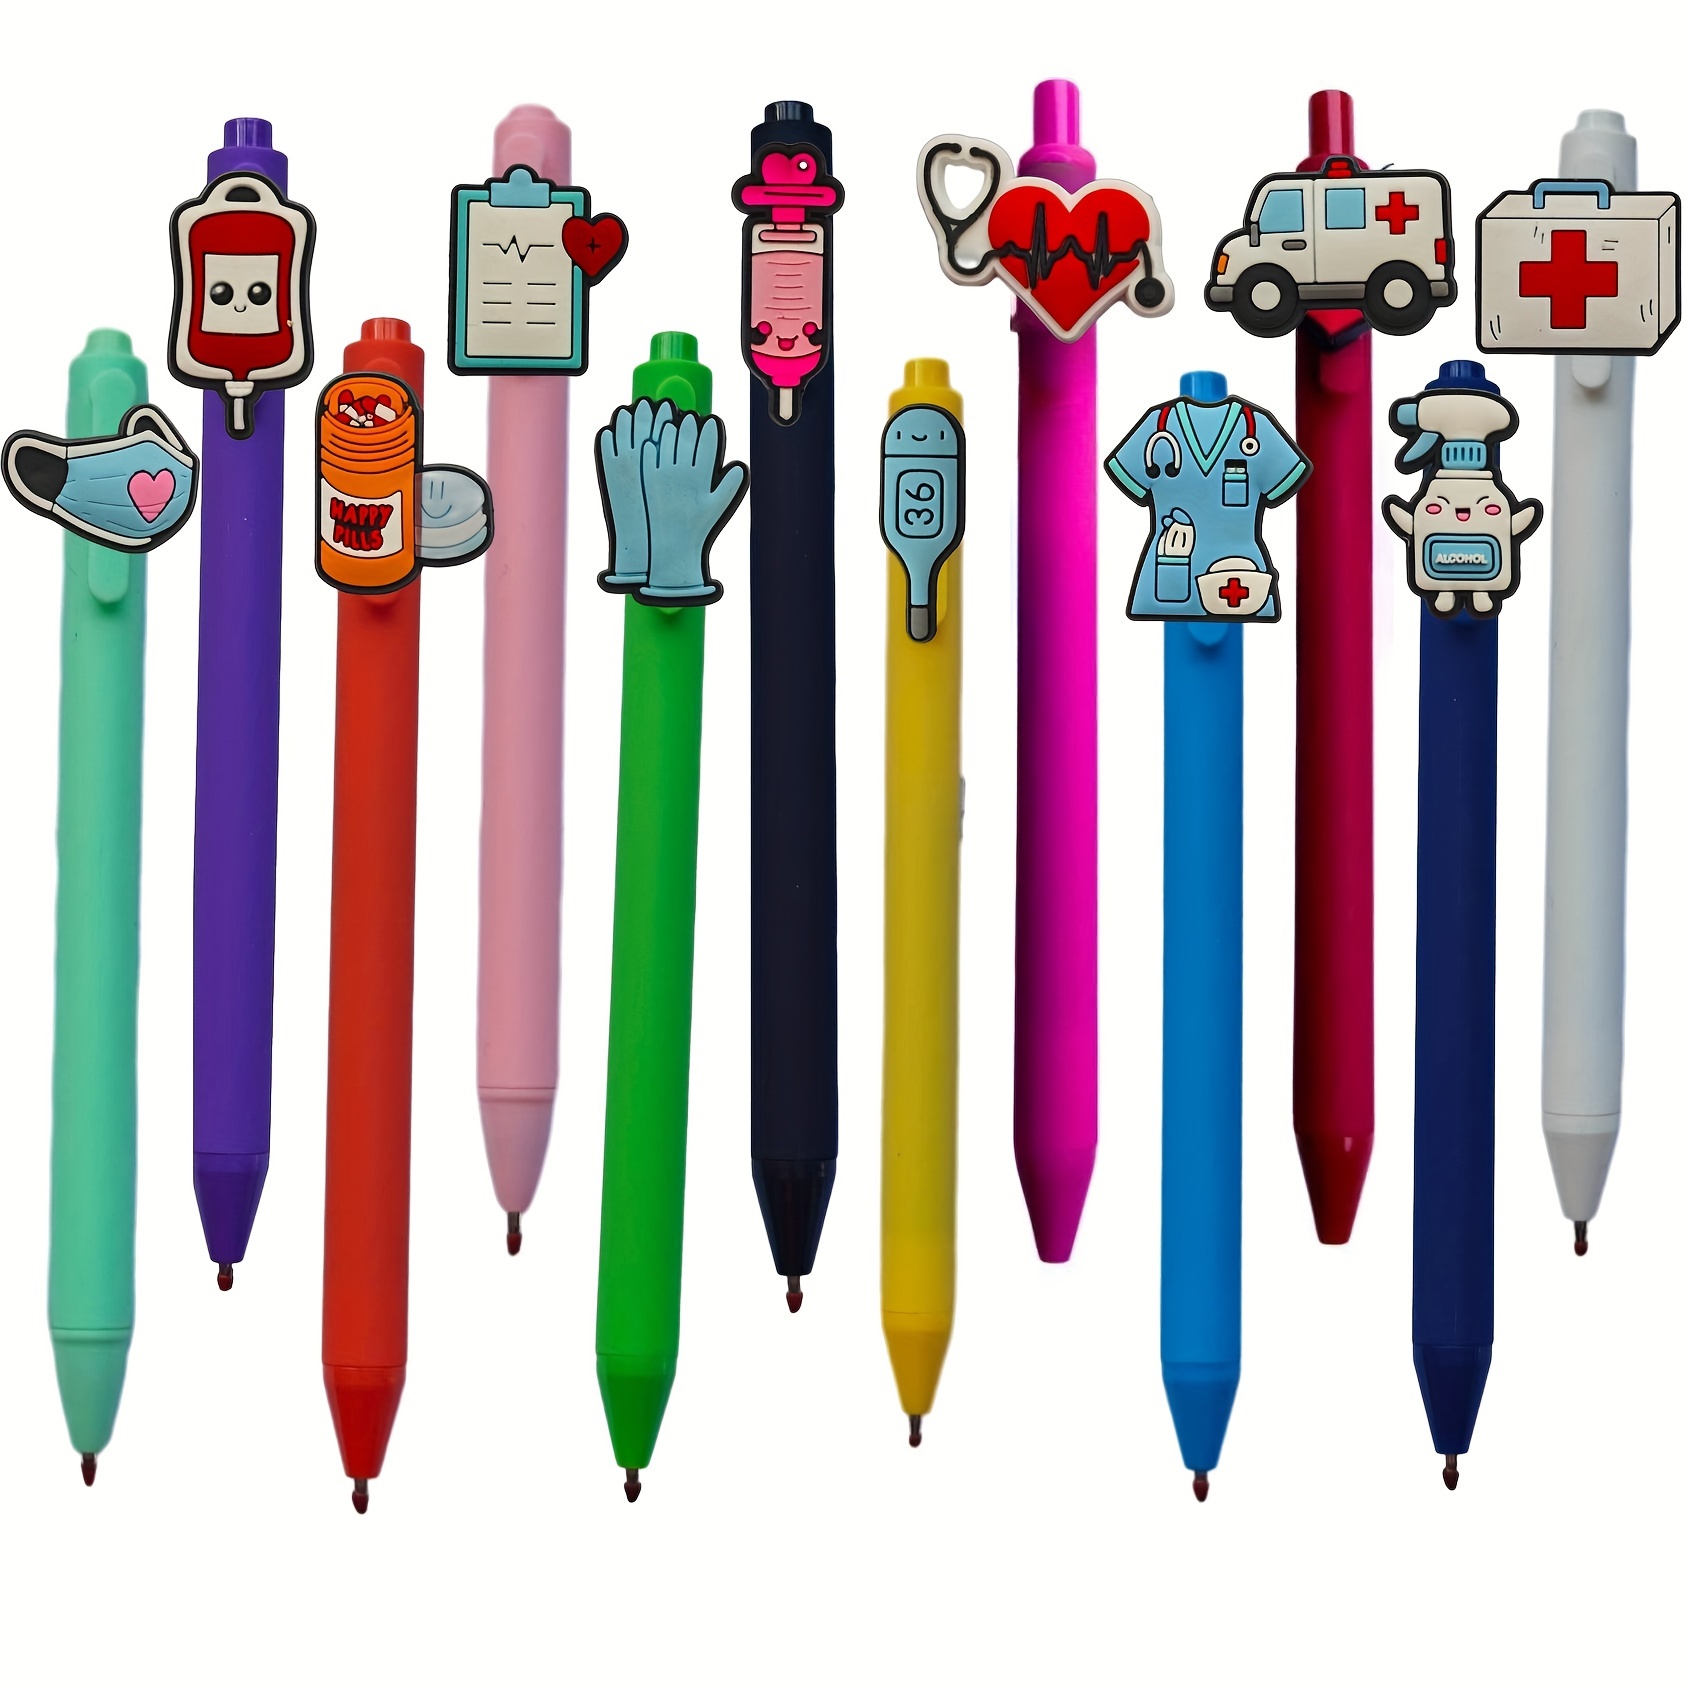 

hospital-grade" Charming Nurse-themed Ballpoint Pens Set - 12/7/5pcs With Heart & Syringe Designs | Perfect Gift For Nurses, Medical Assistants & Students | Ideal For Office & School Use